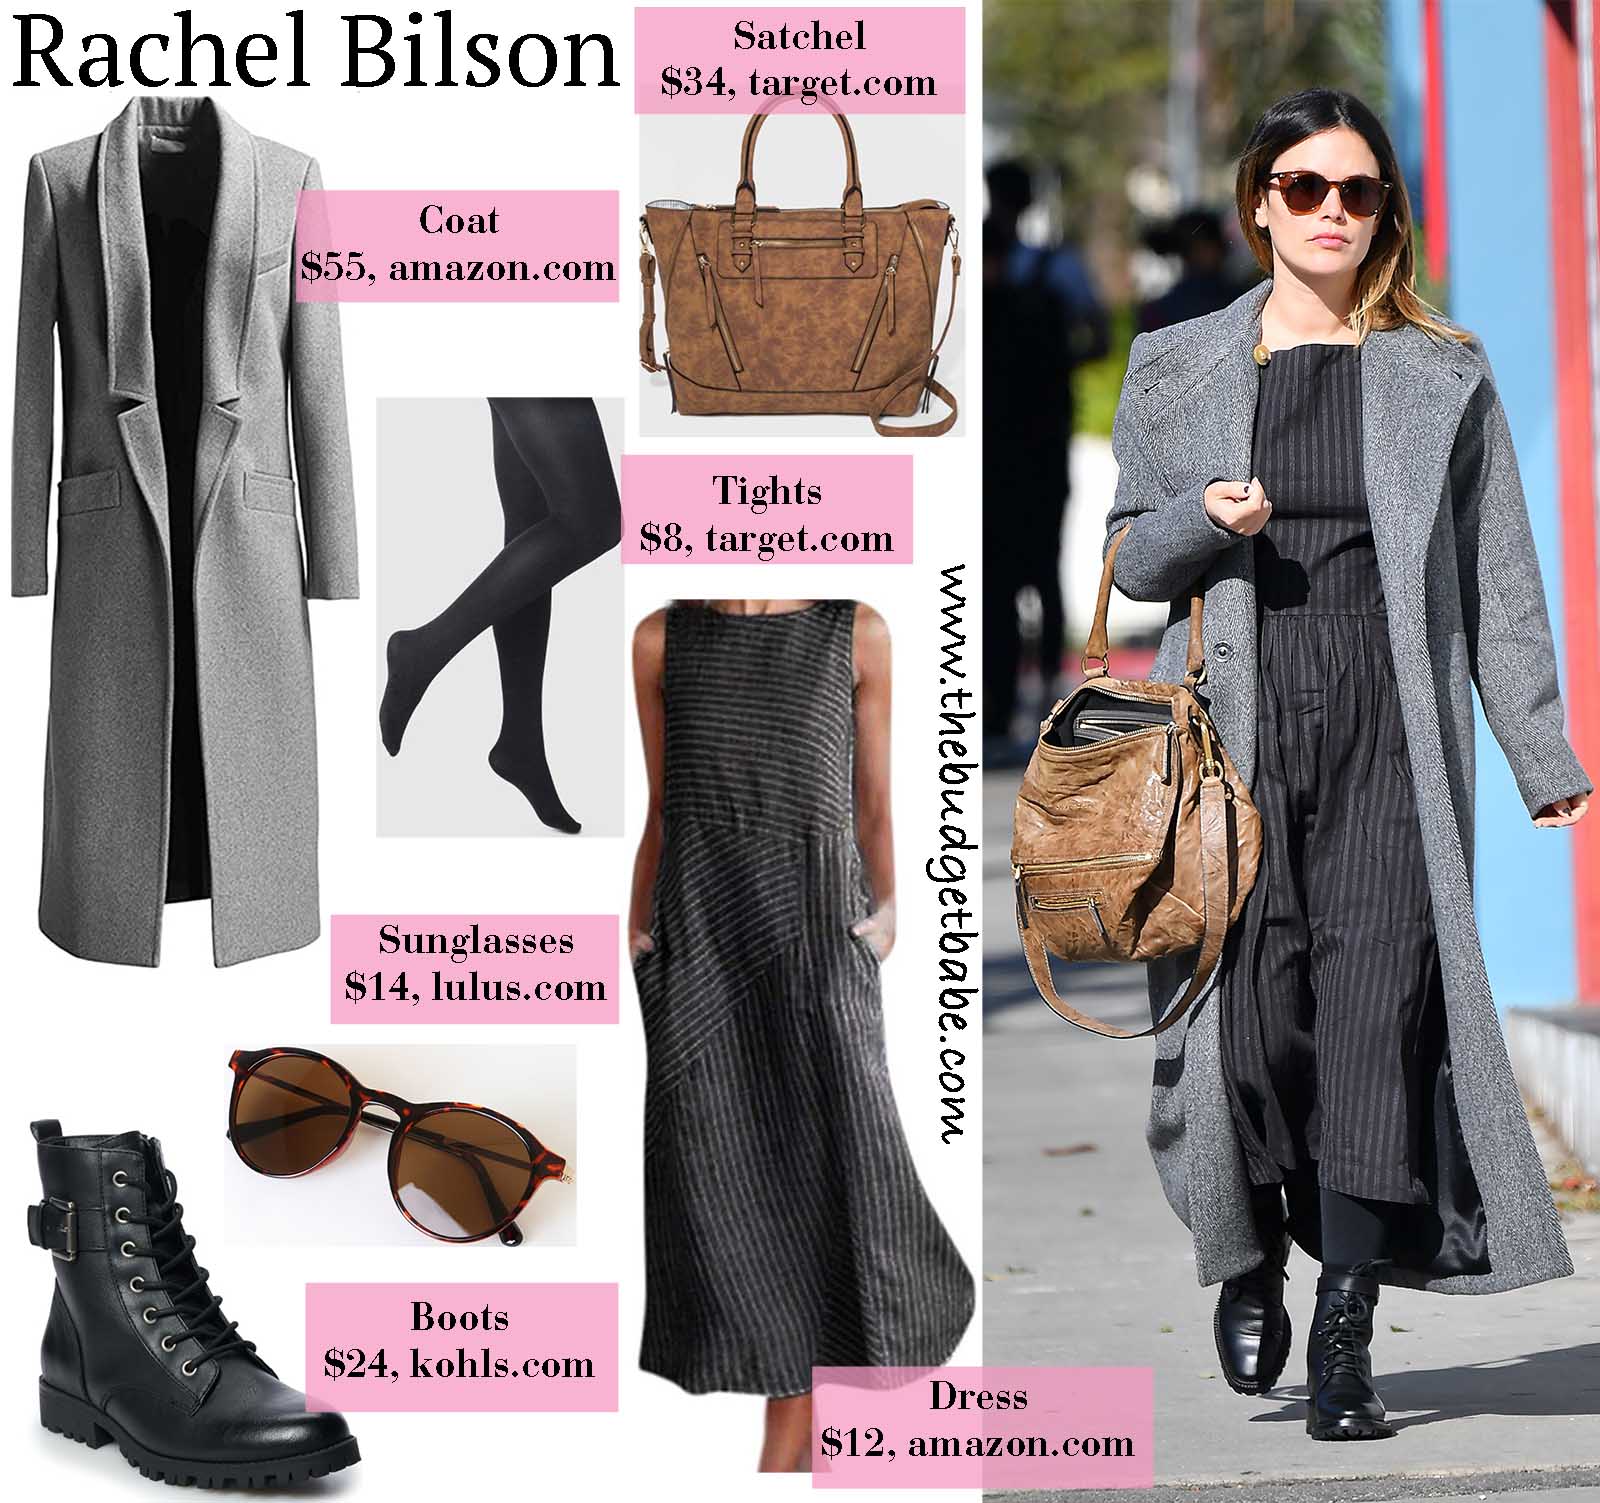 Rachel Bilson is stylish in an overcoat and combat boots!